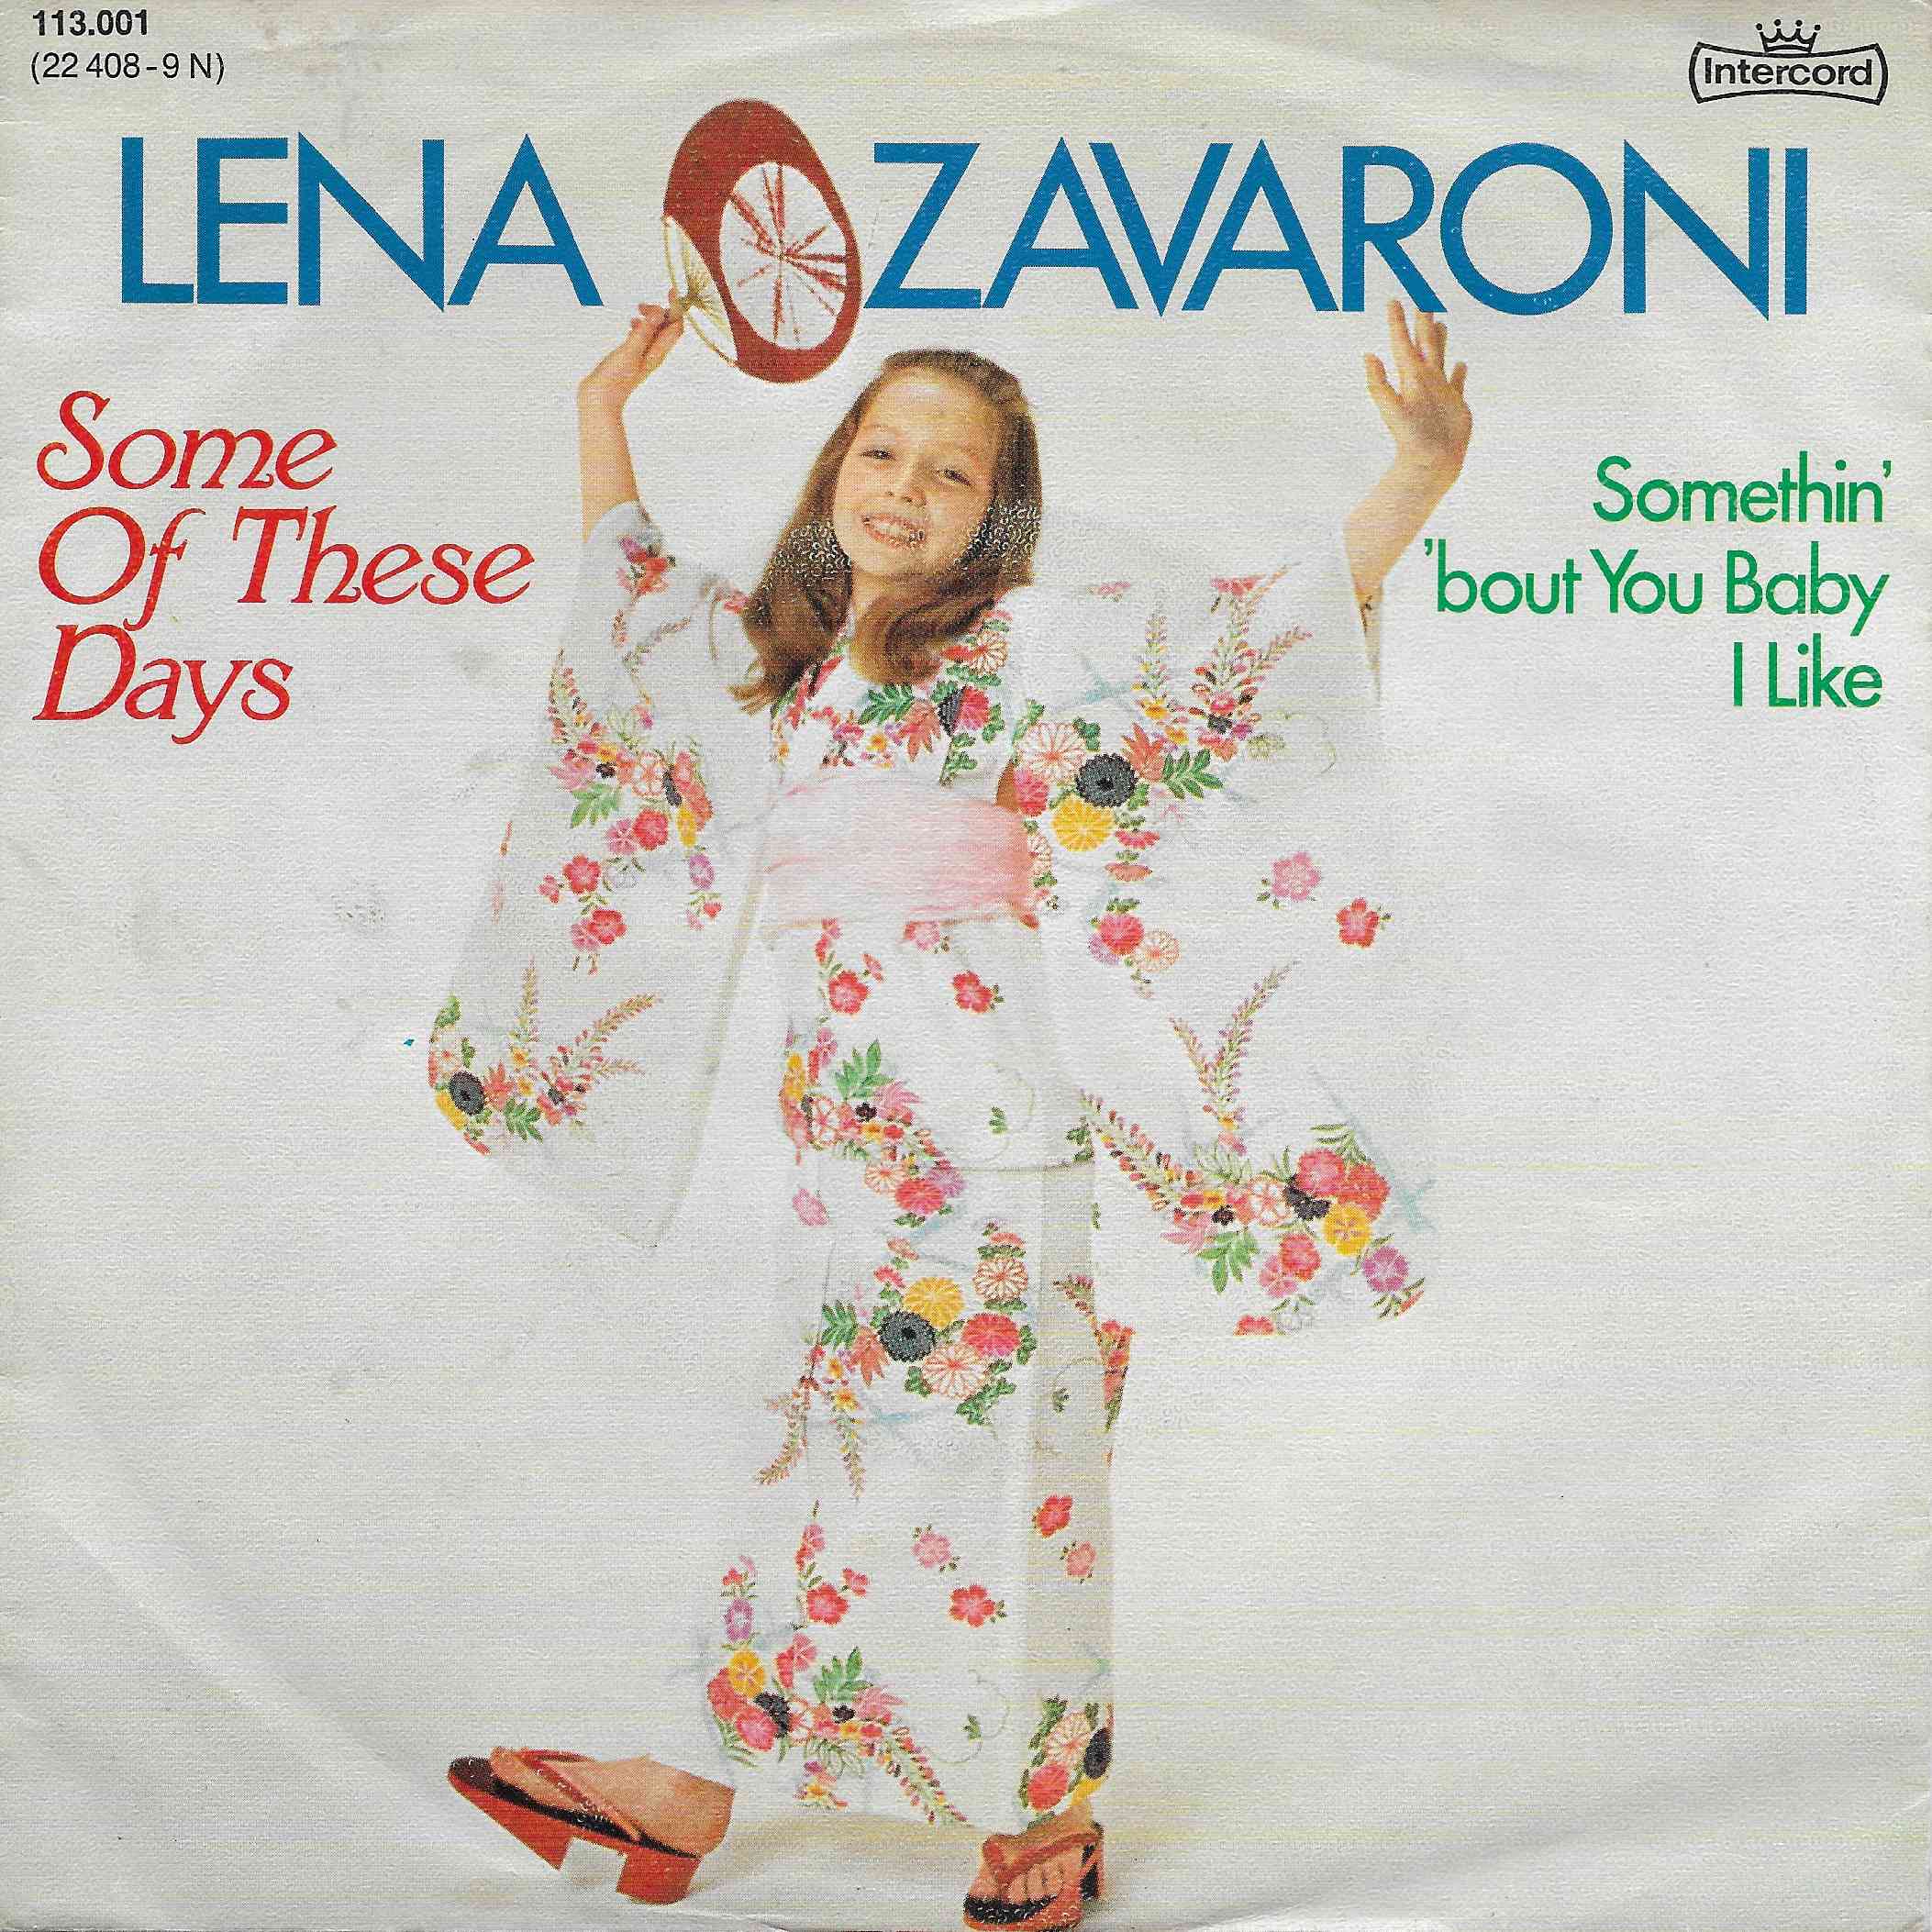 Picture of INT 113.001 Some of these days by artist Lena Zavaroni from the BBC records and Tapes library